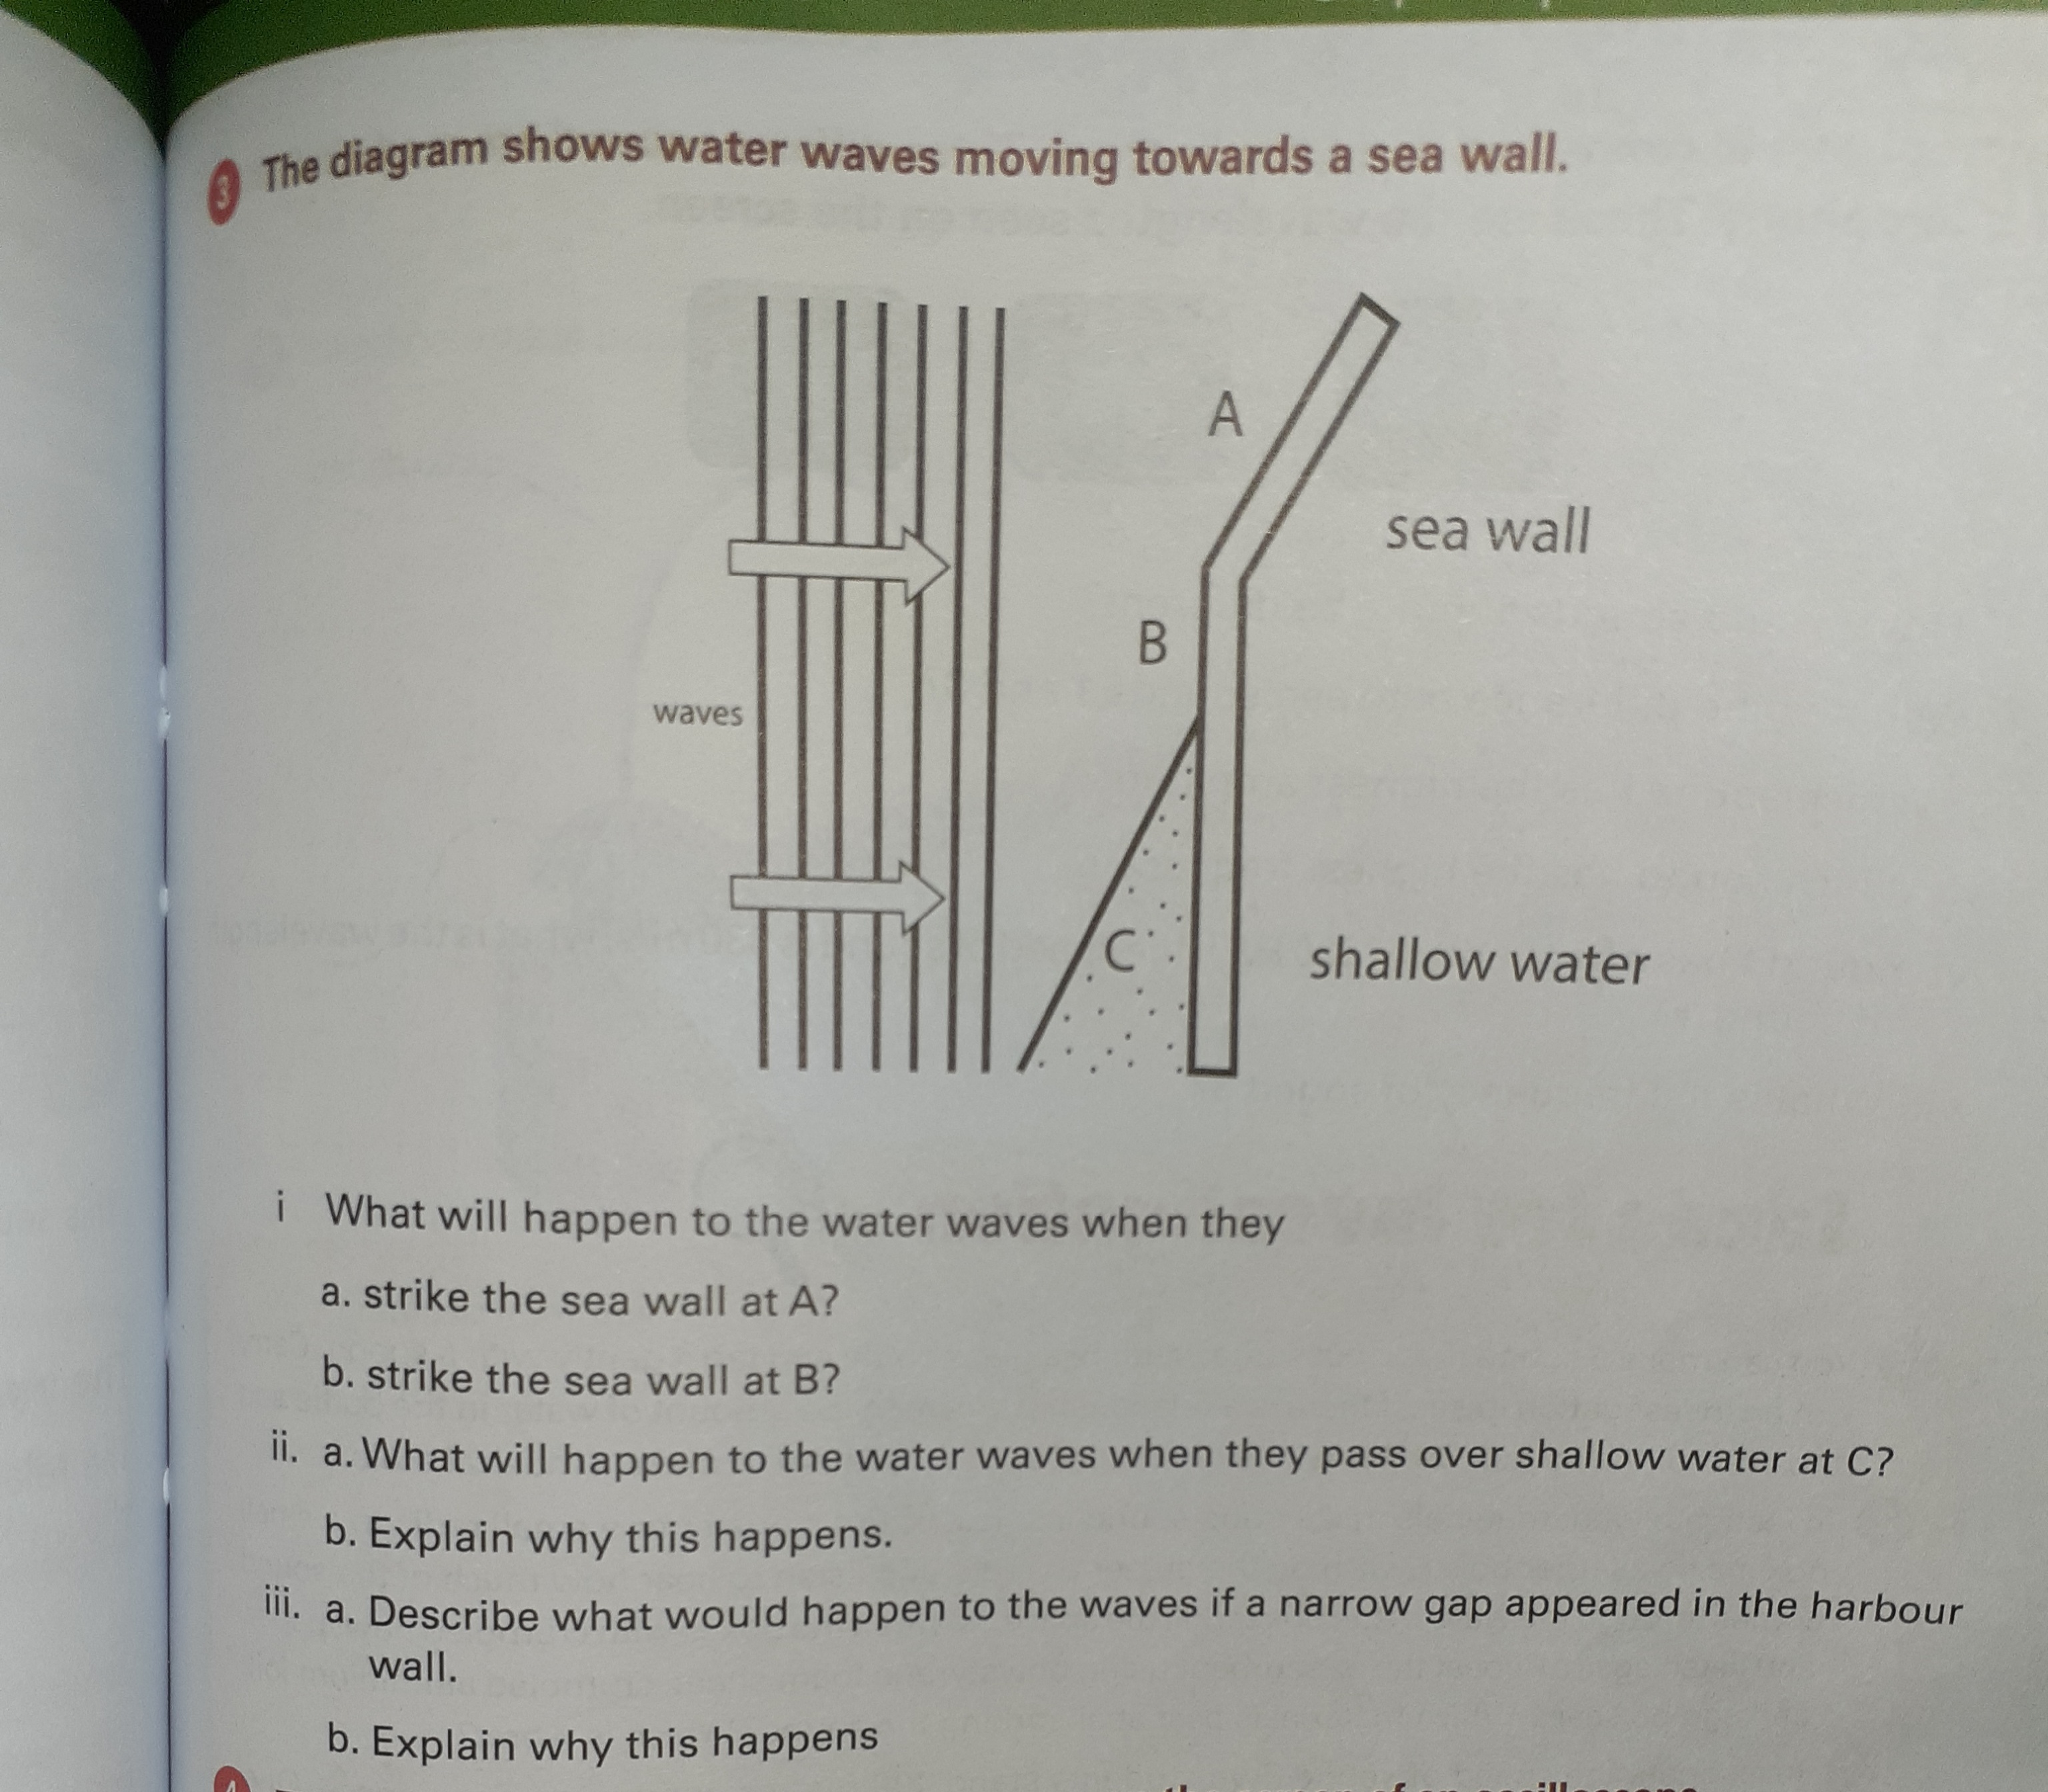 The diagram shows water waves moving towards a sea wall.
A
sea wall
waves
shallow water
i What will happen to the water waves when they
a. strike the sea wall at A?
b. strike the sea wall at B?
II. a. What will happen to the water waves when they pass over shallow wa
b. Explain why this happens.
III. a. Describe what would happen to the waves if a narrow gap appeared in
wall.
b. Explain why this happens
